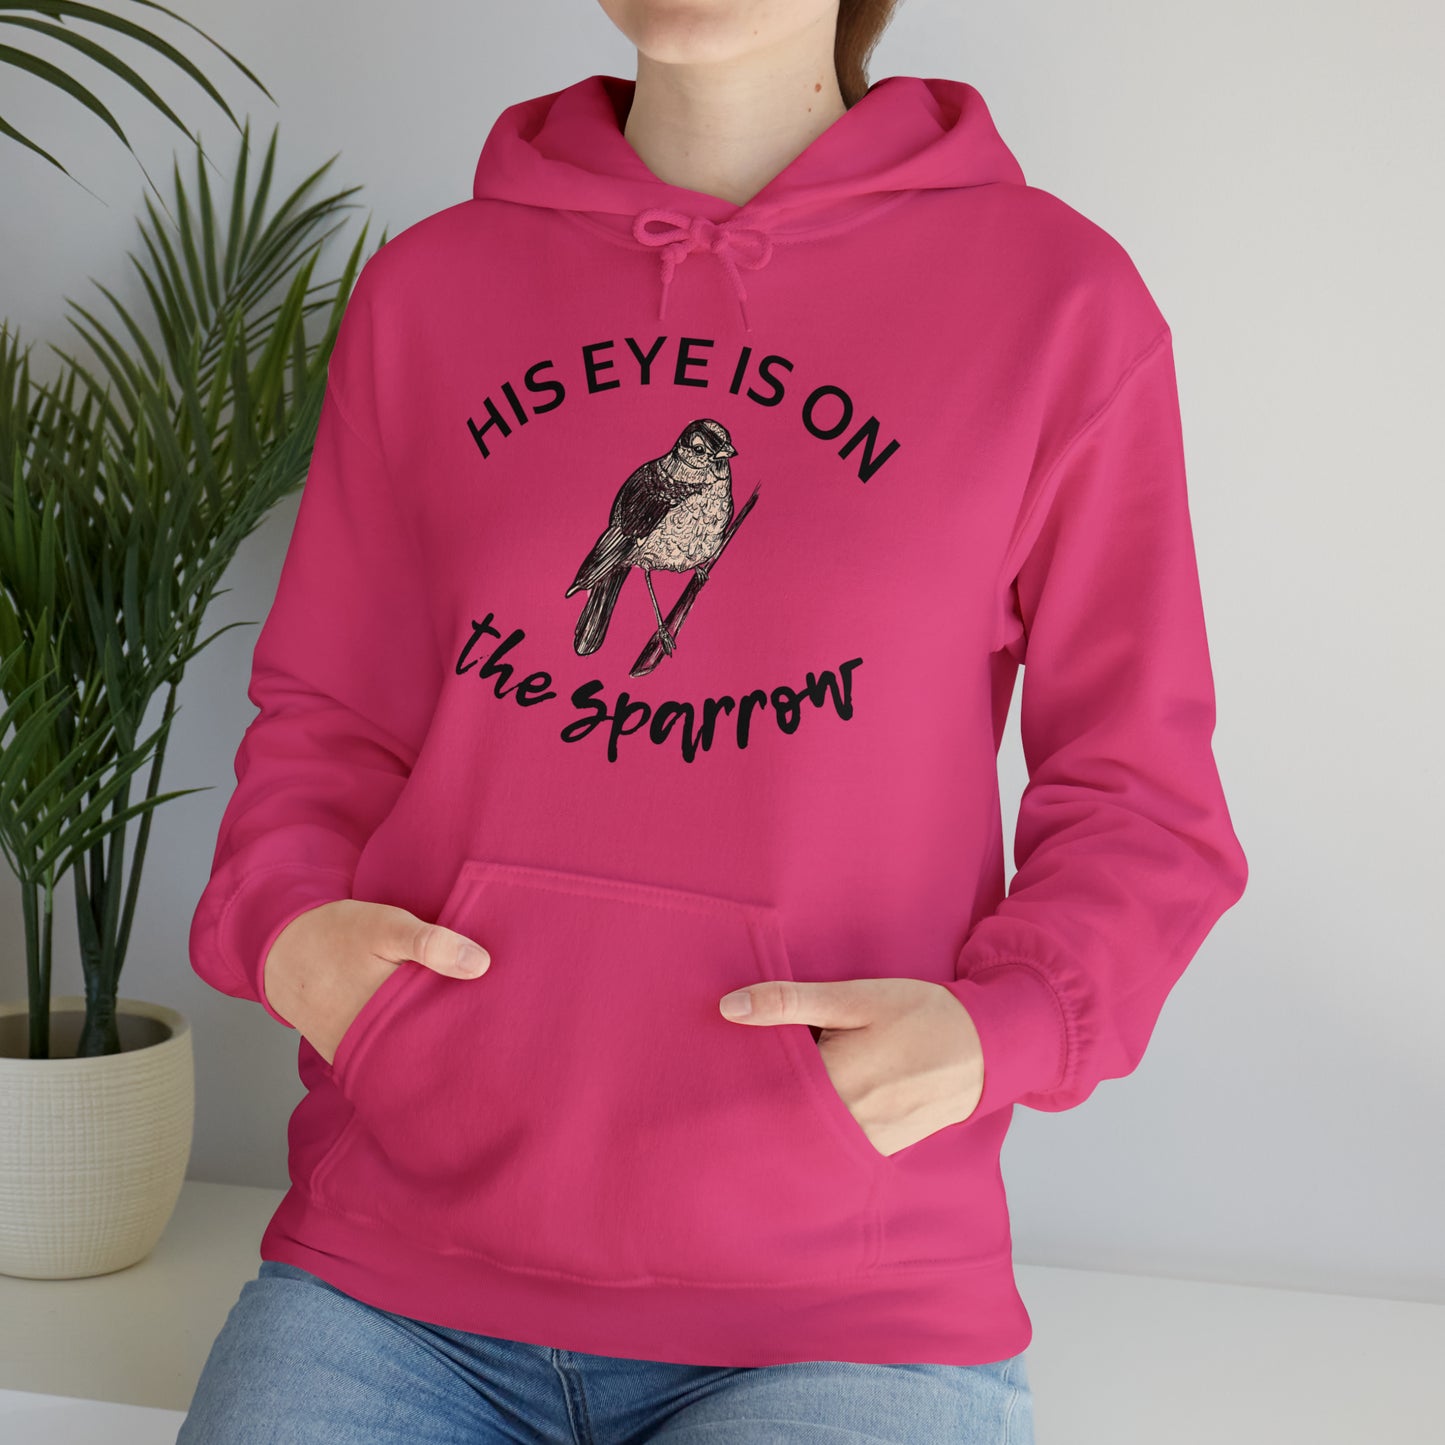 His Eye is on the Sparrow Hooded Sweatshirt (Green Pastures Apparel)